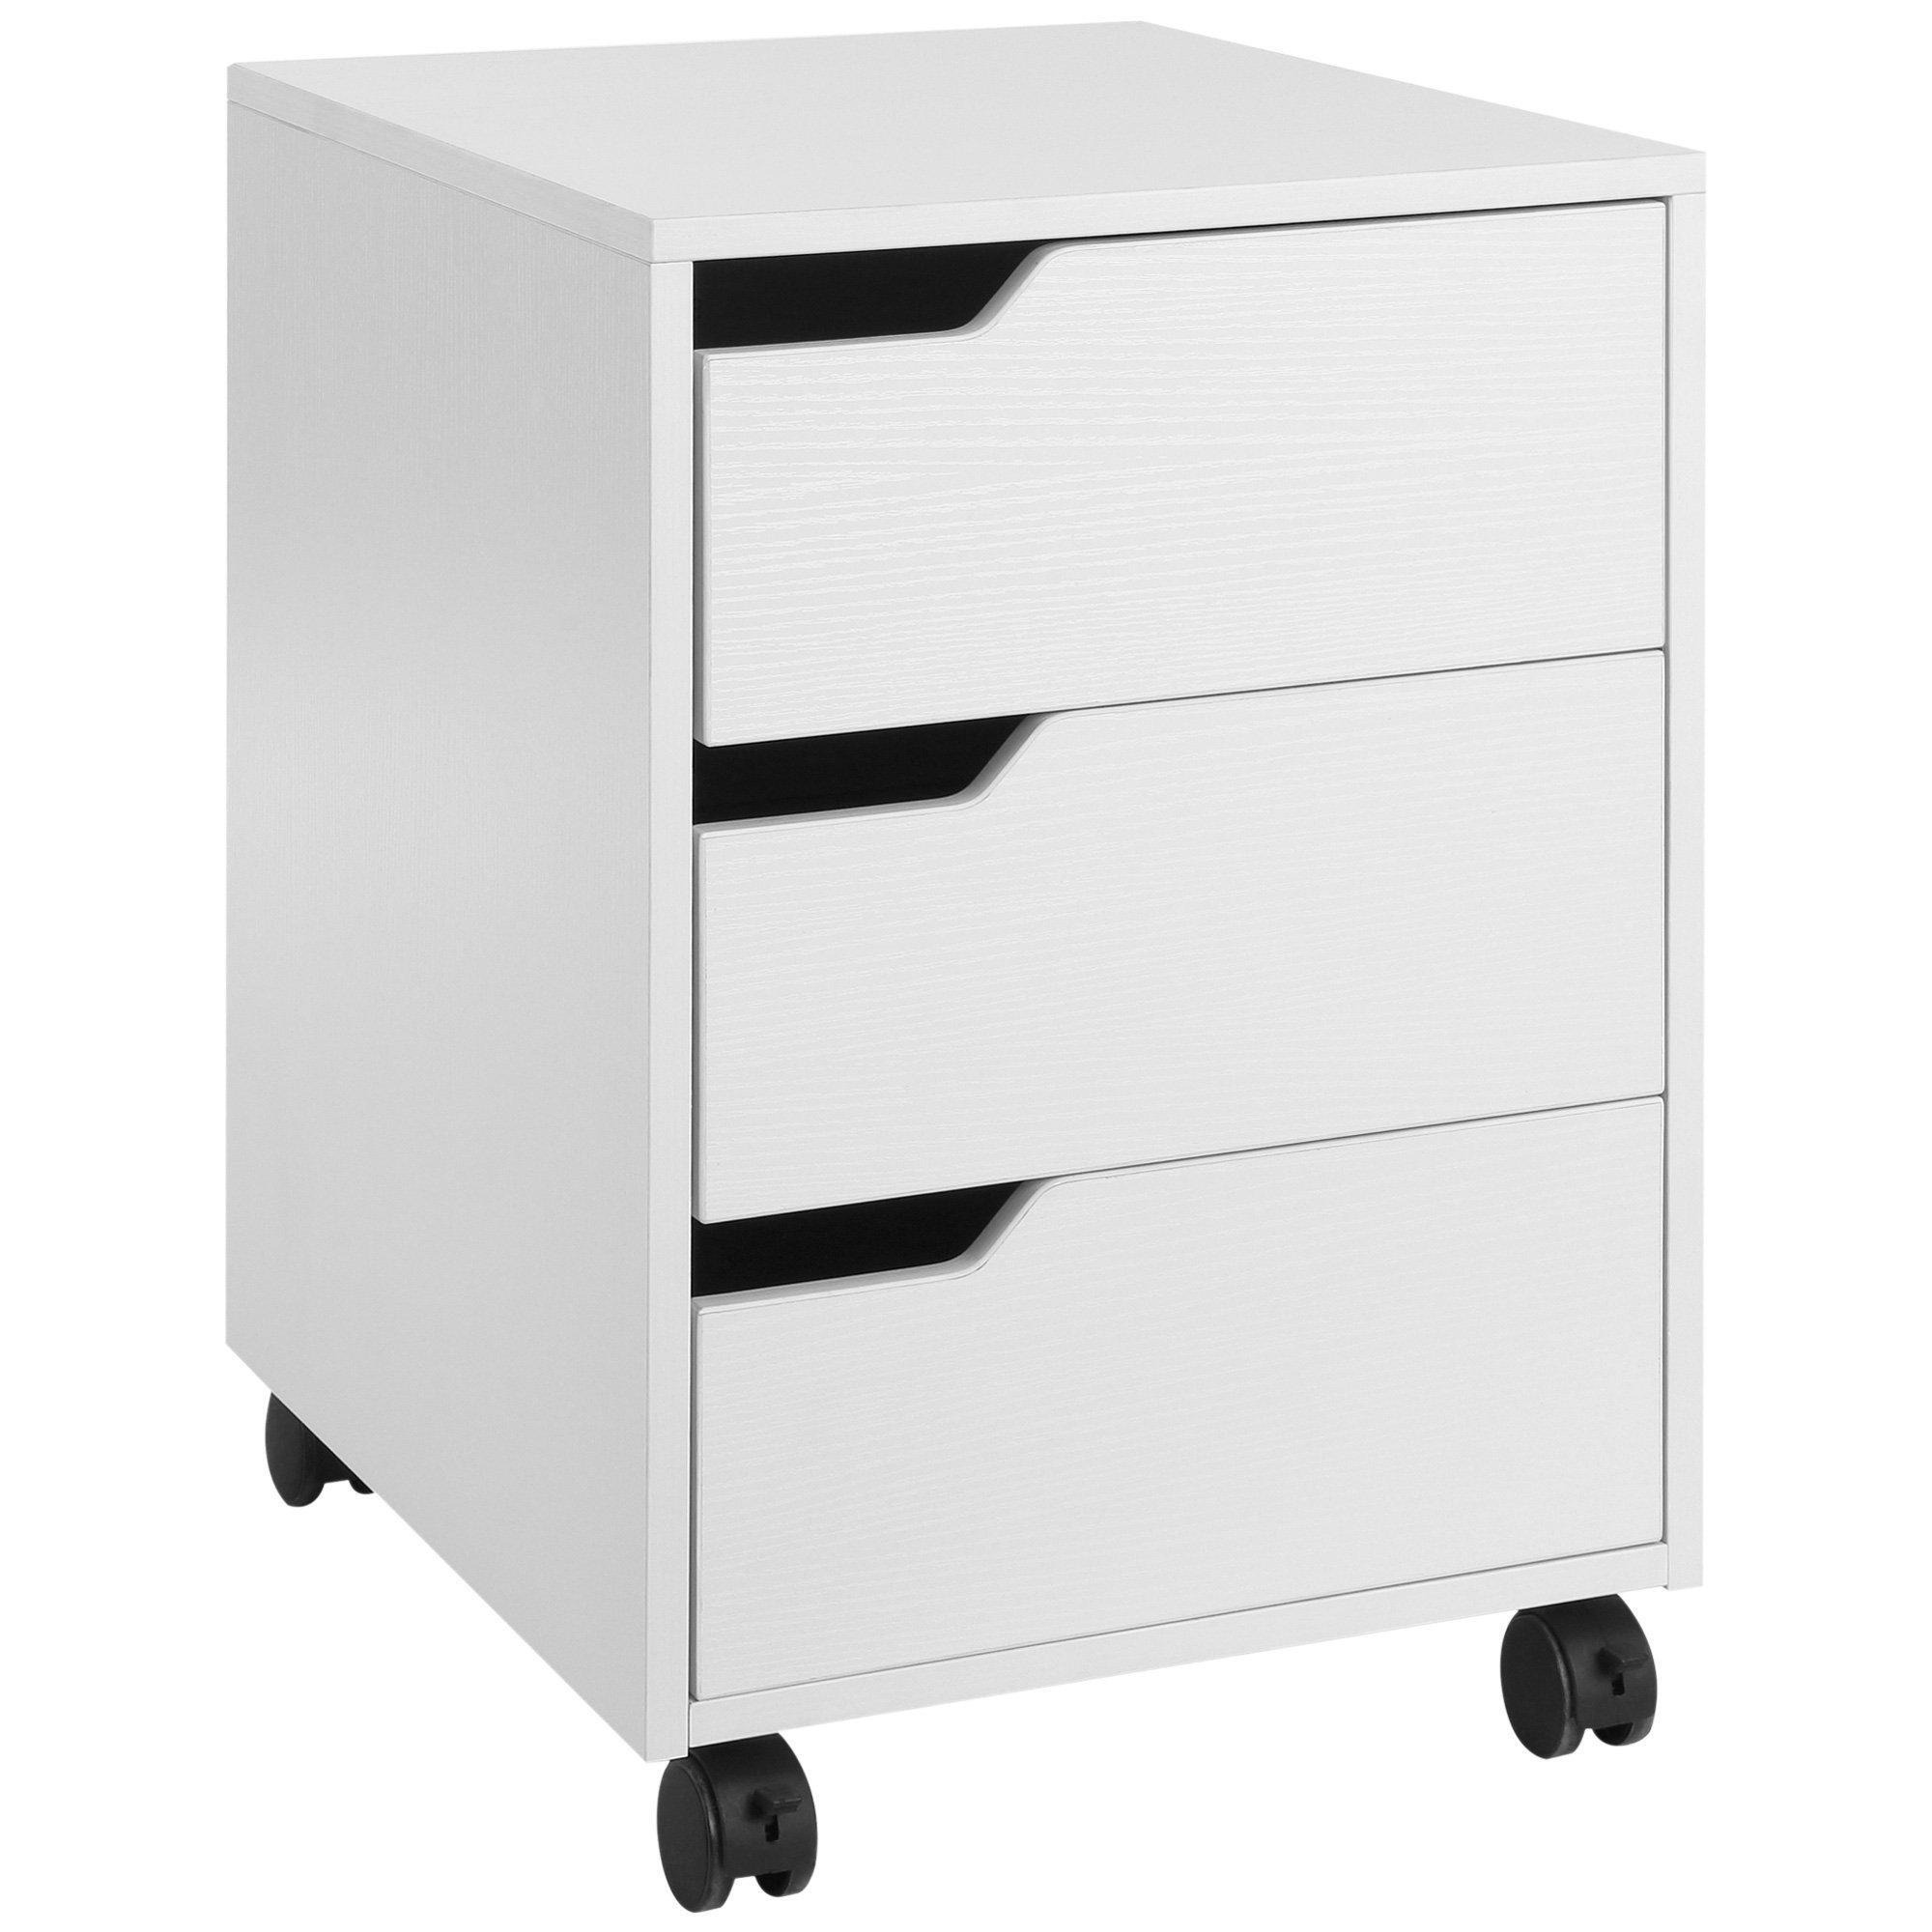 3 Drawer Mobile File Cabinet Vertical Filing Cabinet with Wheels - image 1